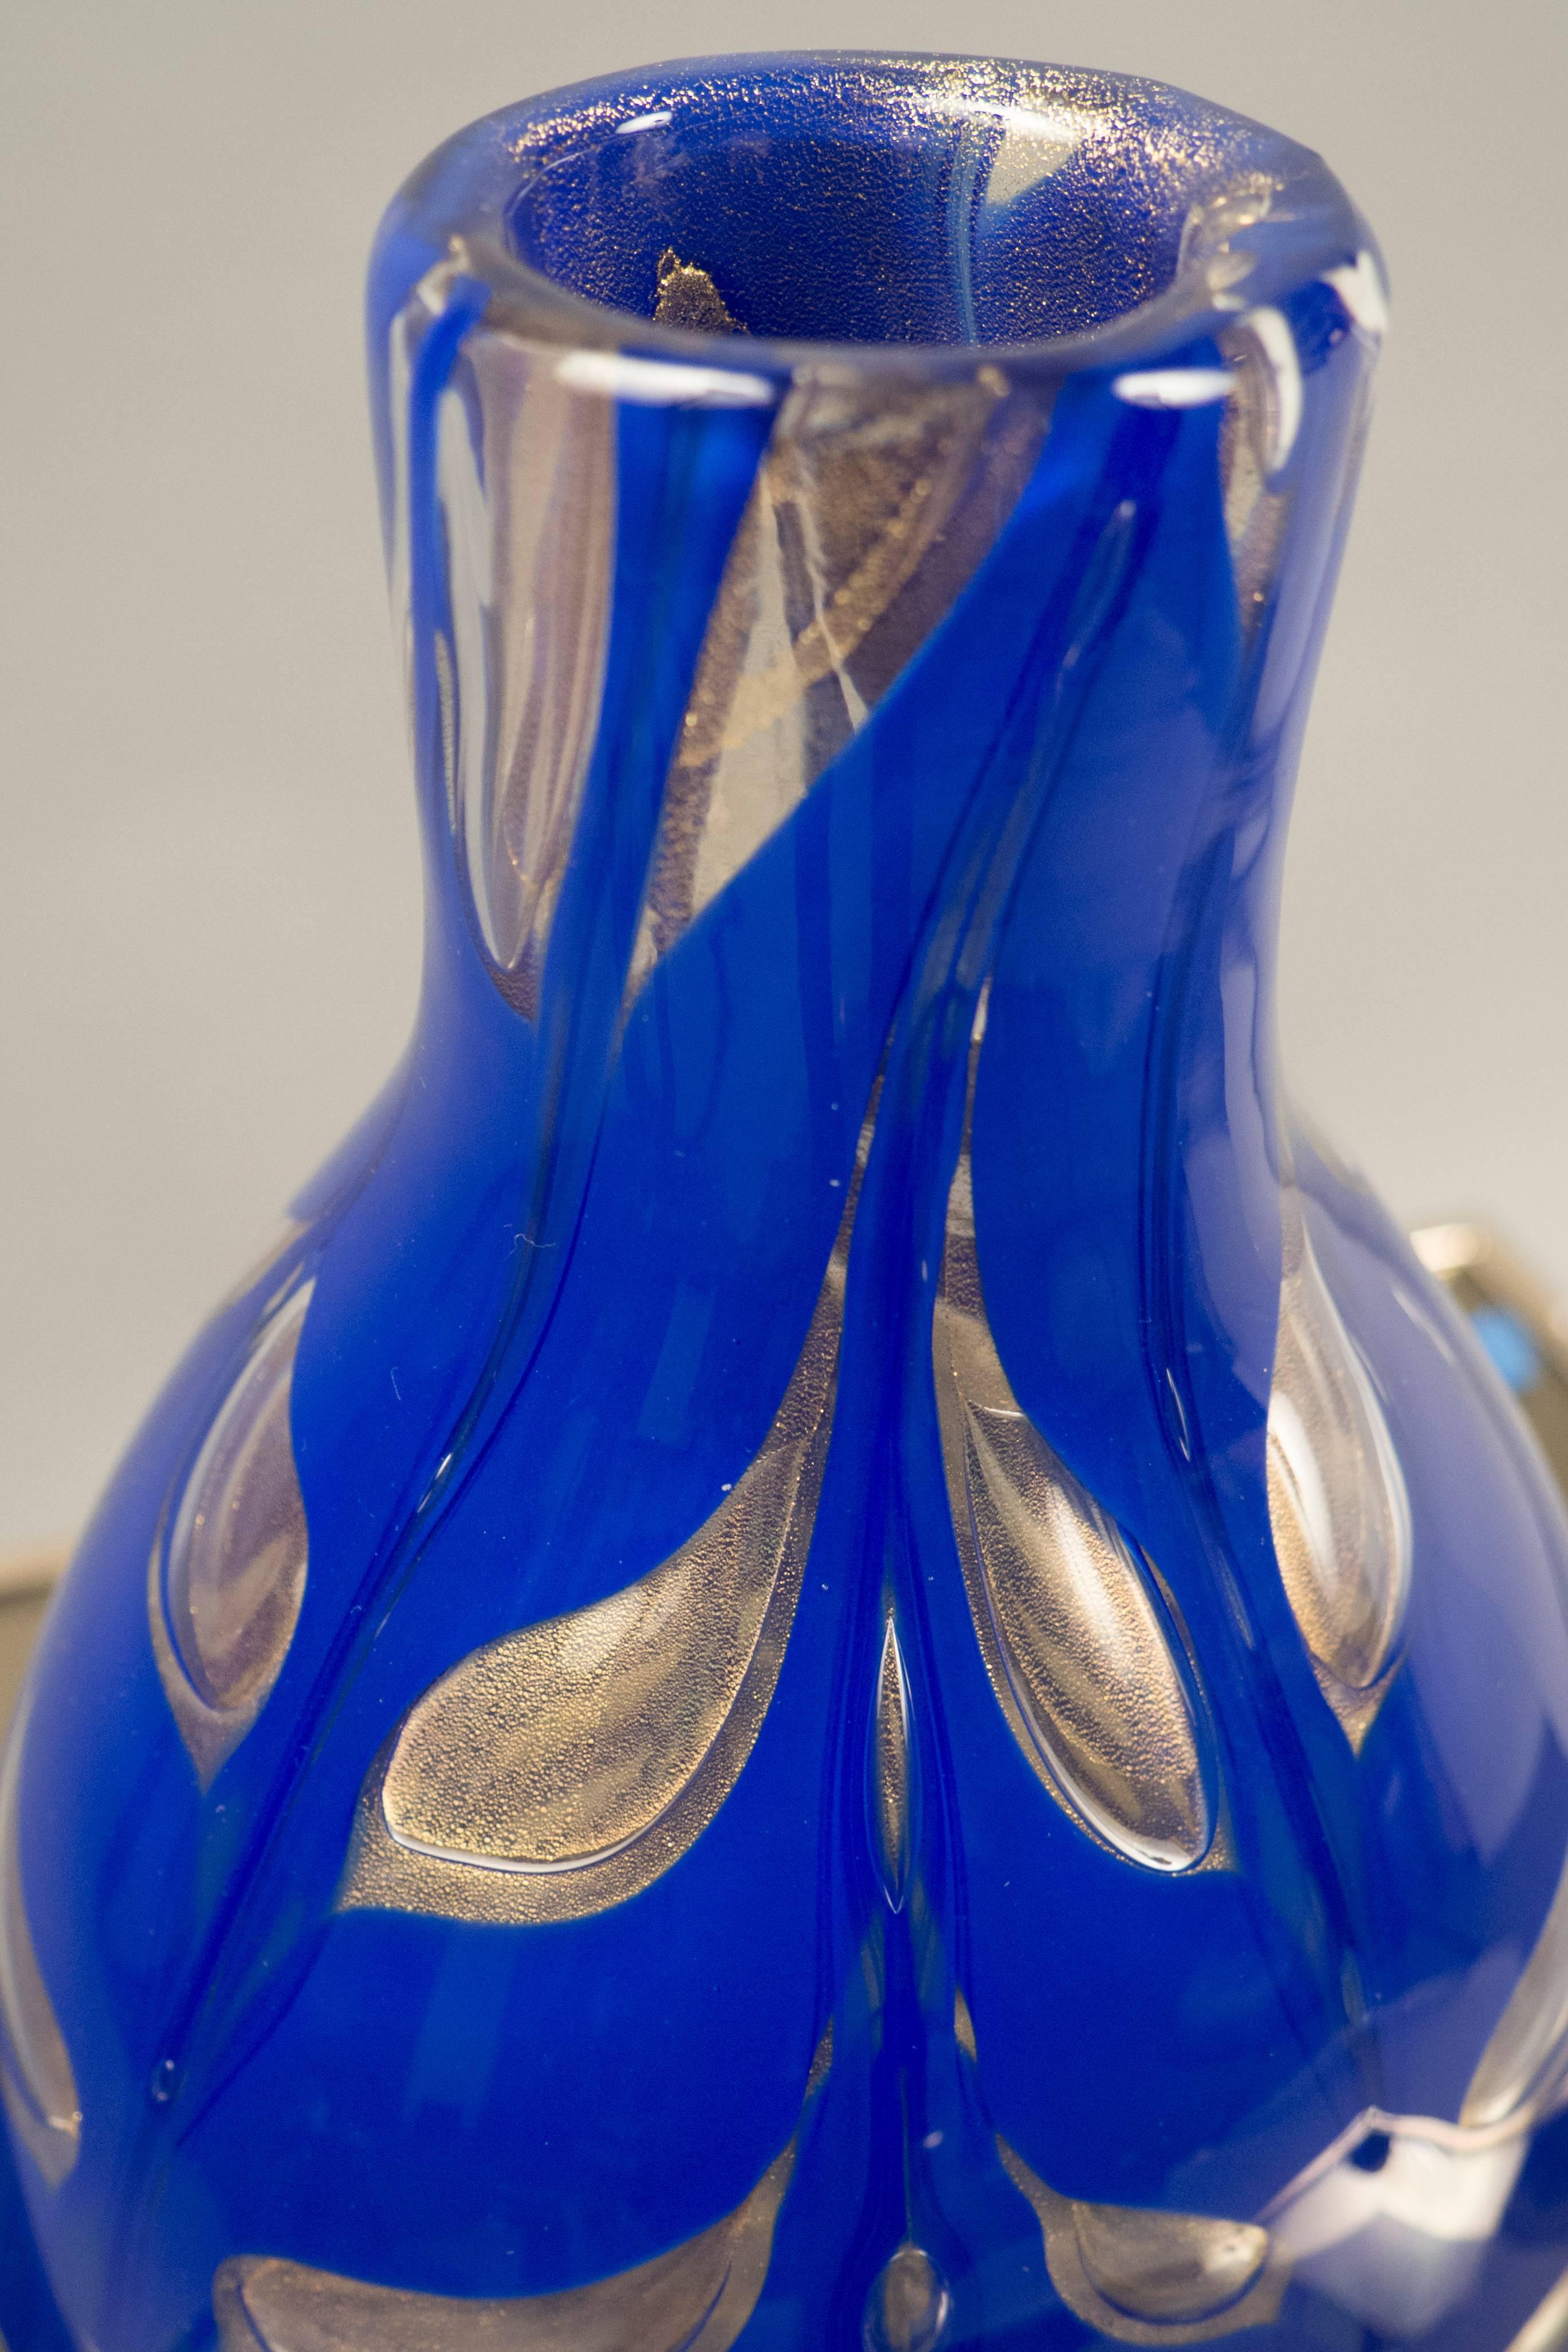 Royal blue flask shaped glass vase with clear leaf-like decorations with gold dust inclusions throughout. Signed on the bottom.
   